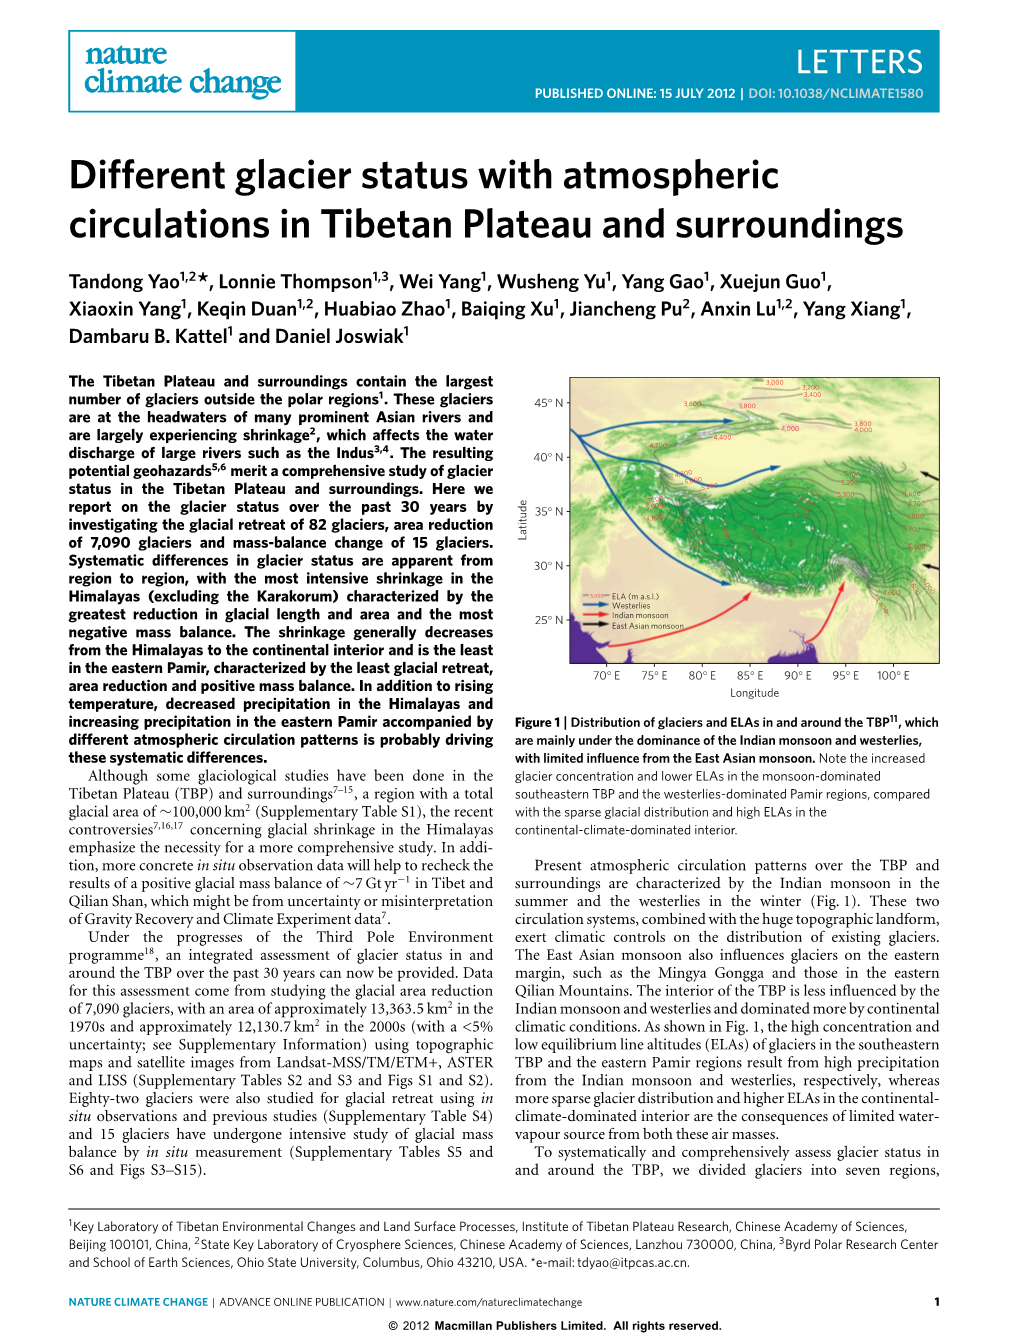 Different Glacier Status with Atmospheric Circulations in Tibetan Plateau and Surroundings